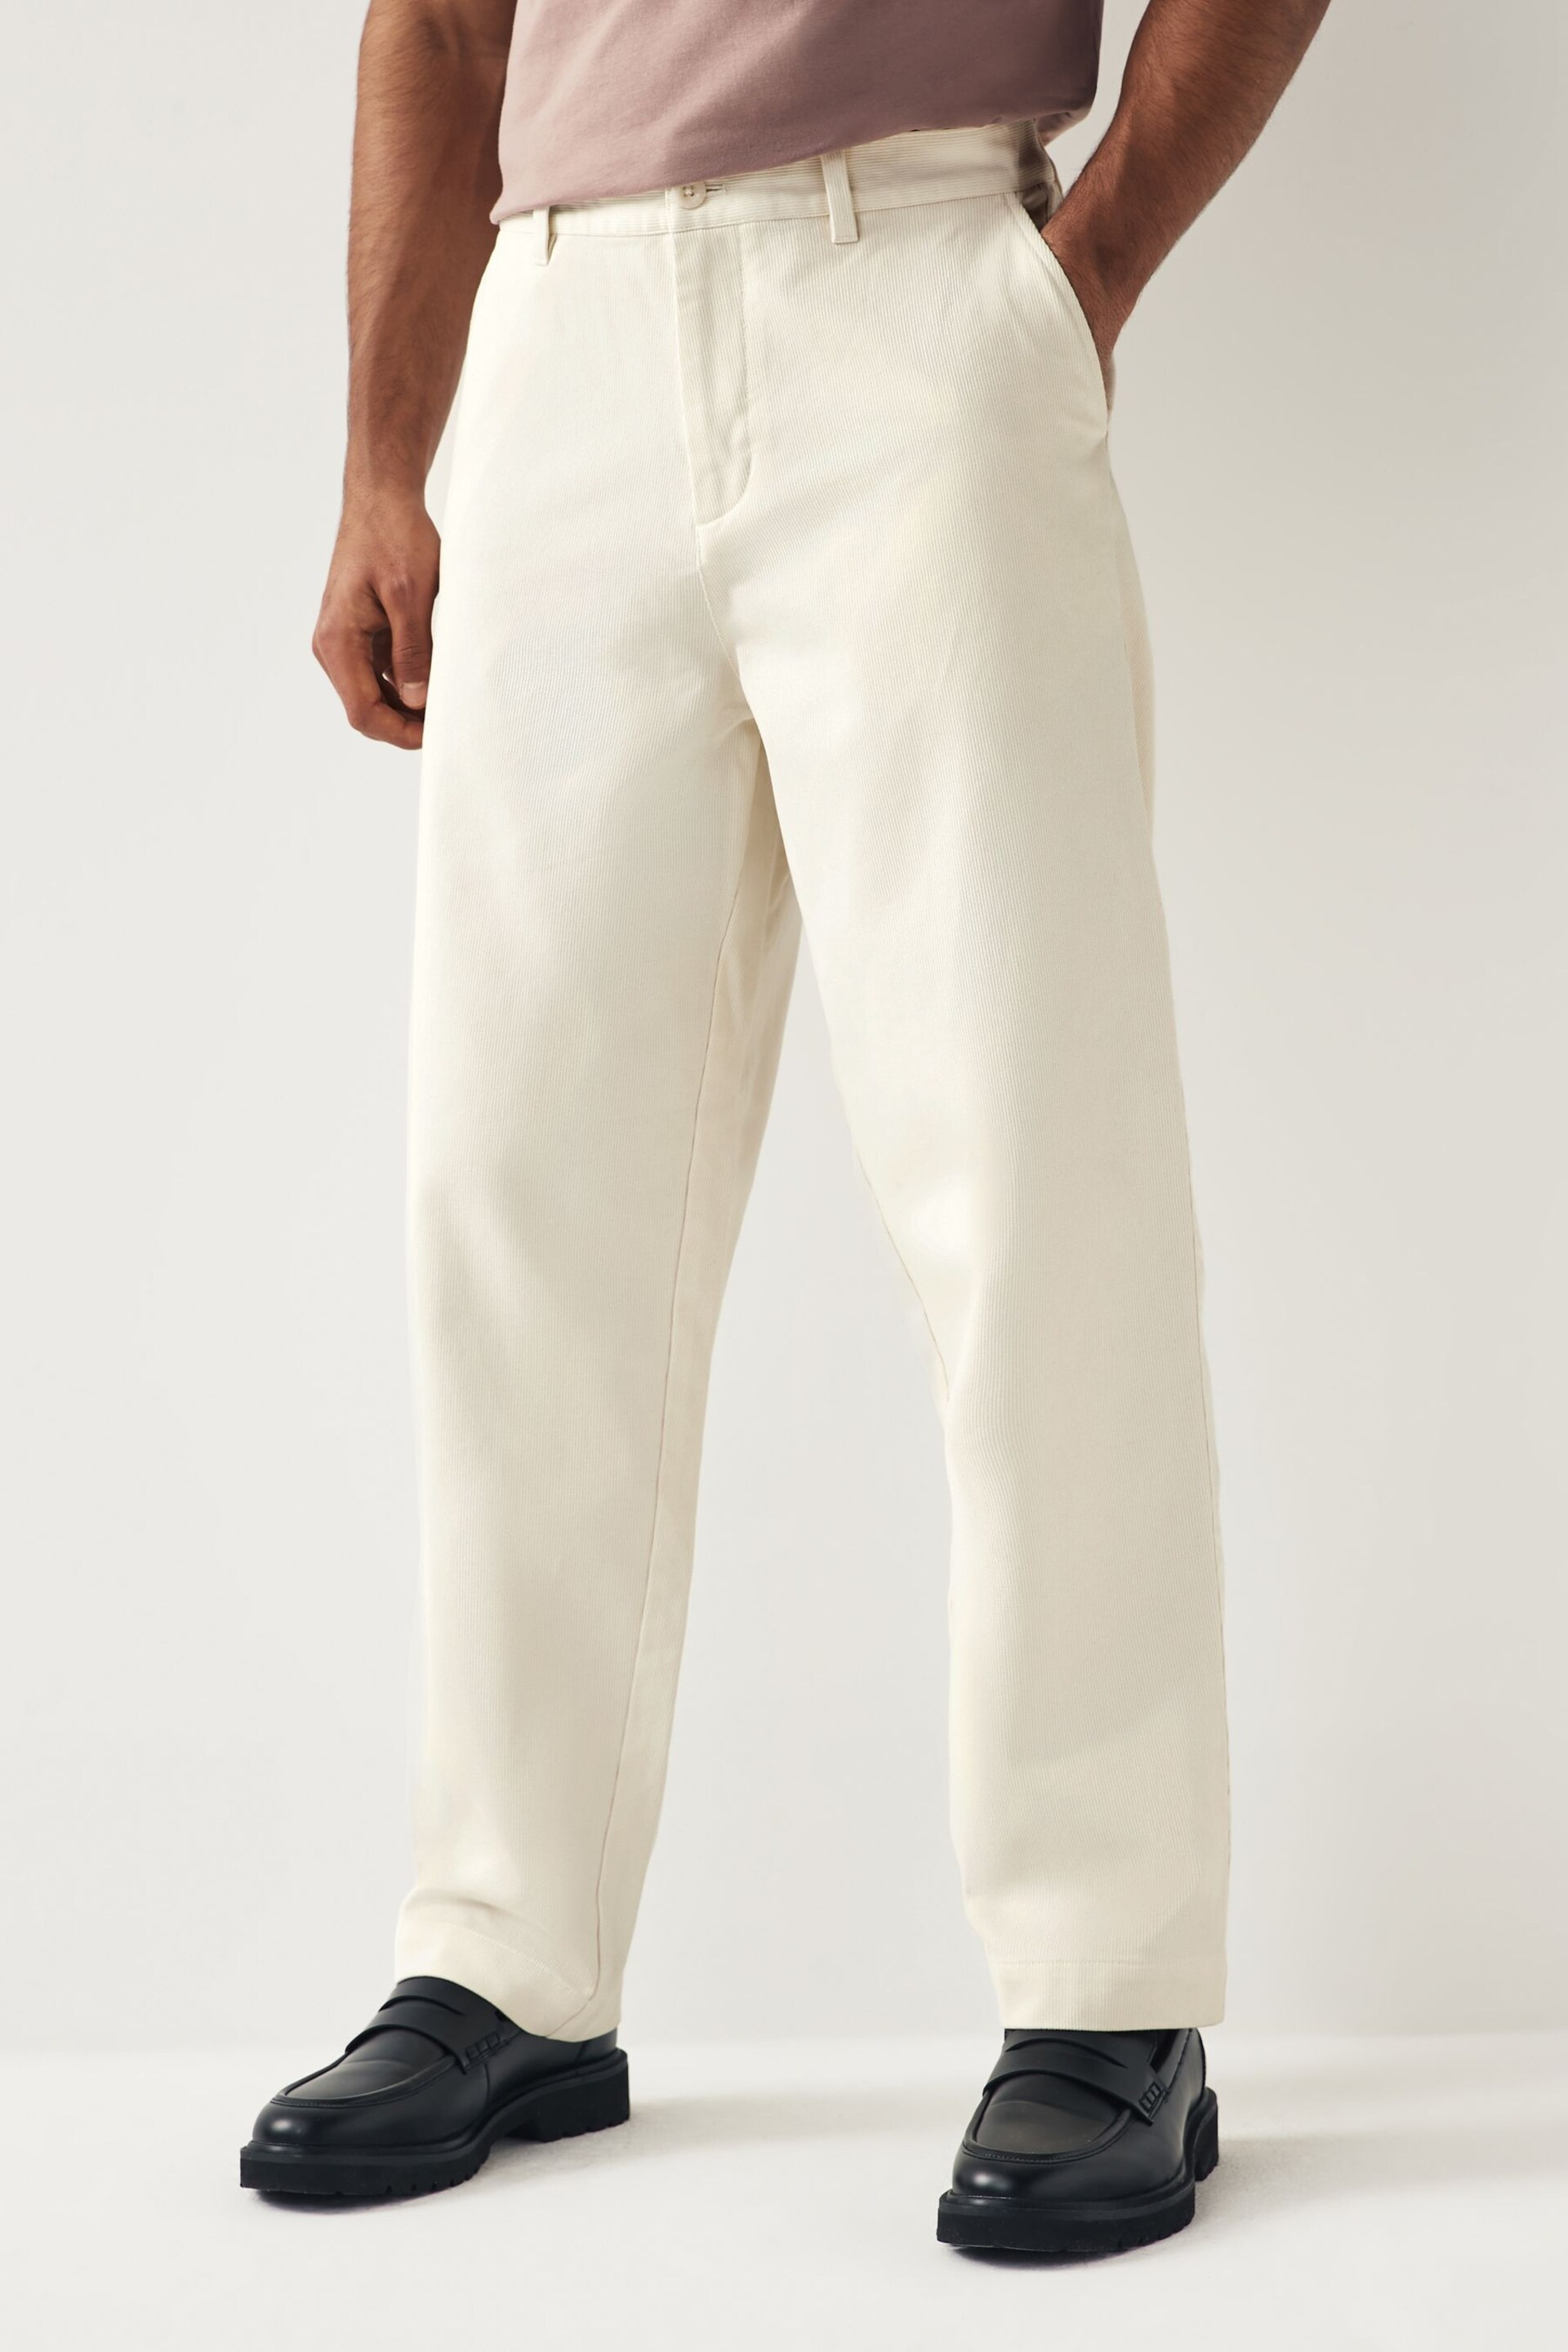 Fred Perry Straight Fit Bedford Cord Ecru White Trousers - Image 1 of 7